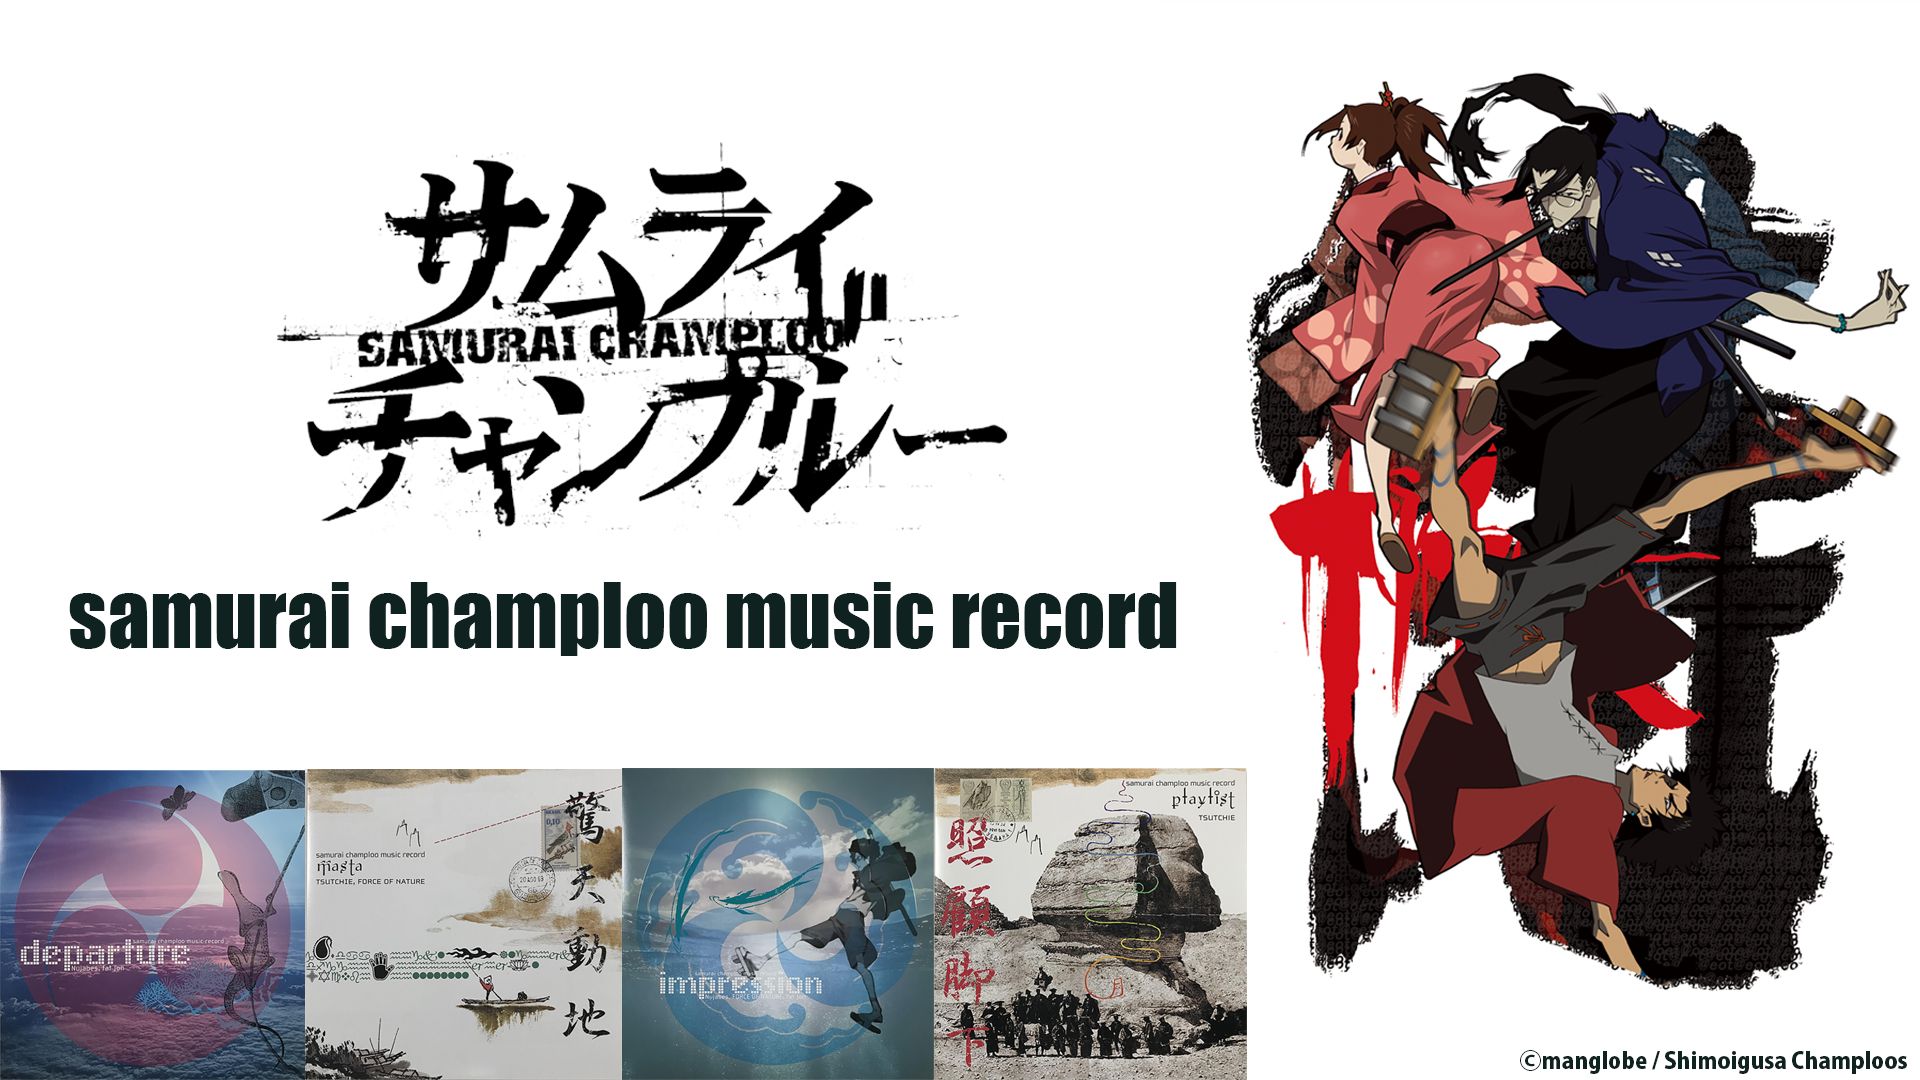 champloo_streaming Samurai Champloo Soundtrack by Nujabes, fat jon, FORCE OF NATURE, and Tsutchie Released on Music Subscription Services Worldwide!